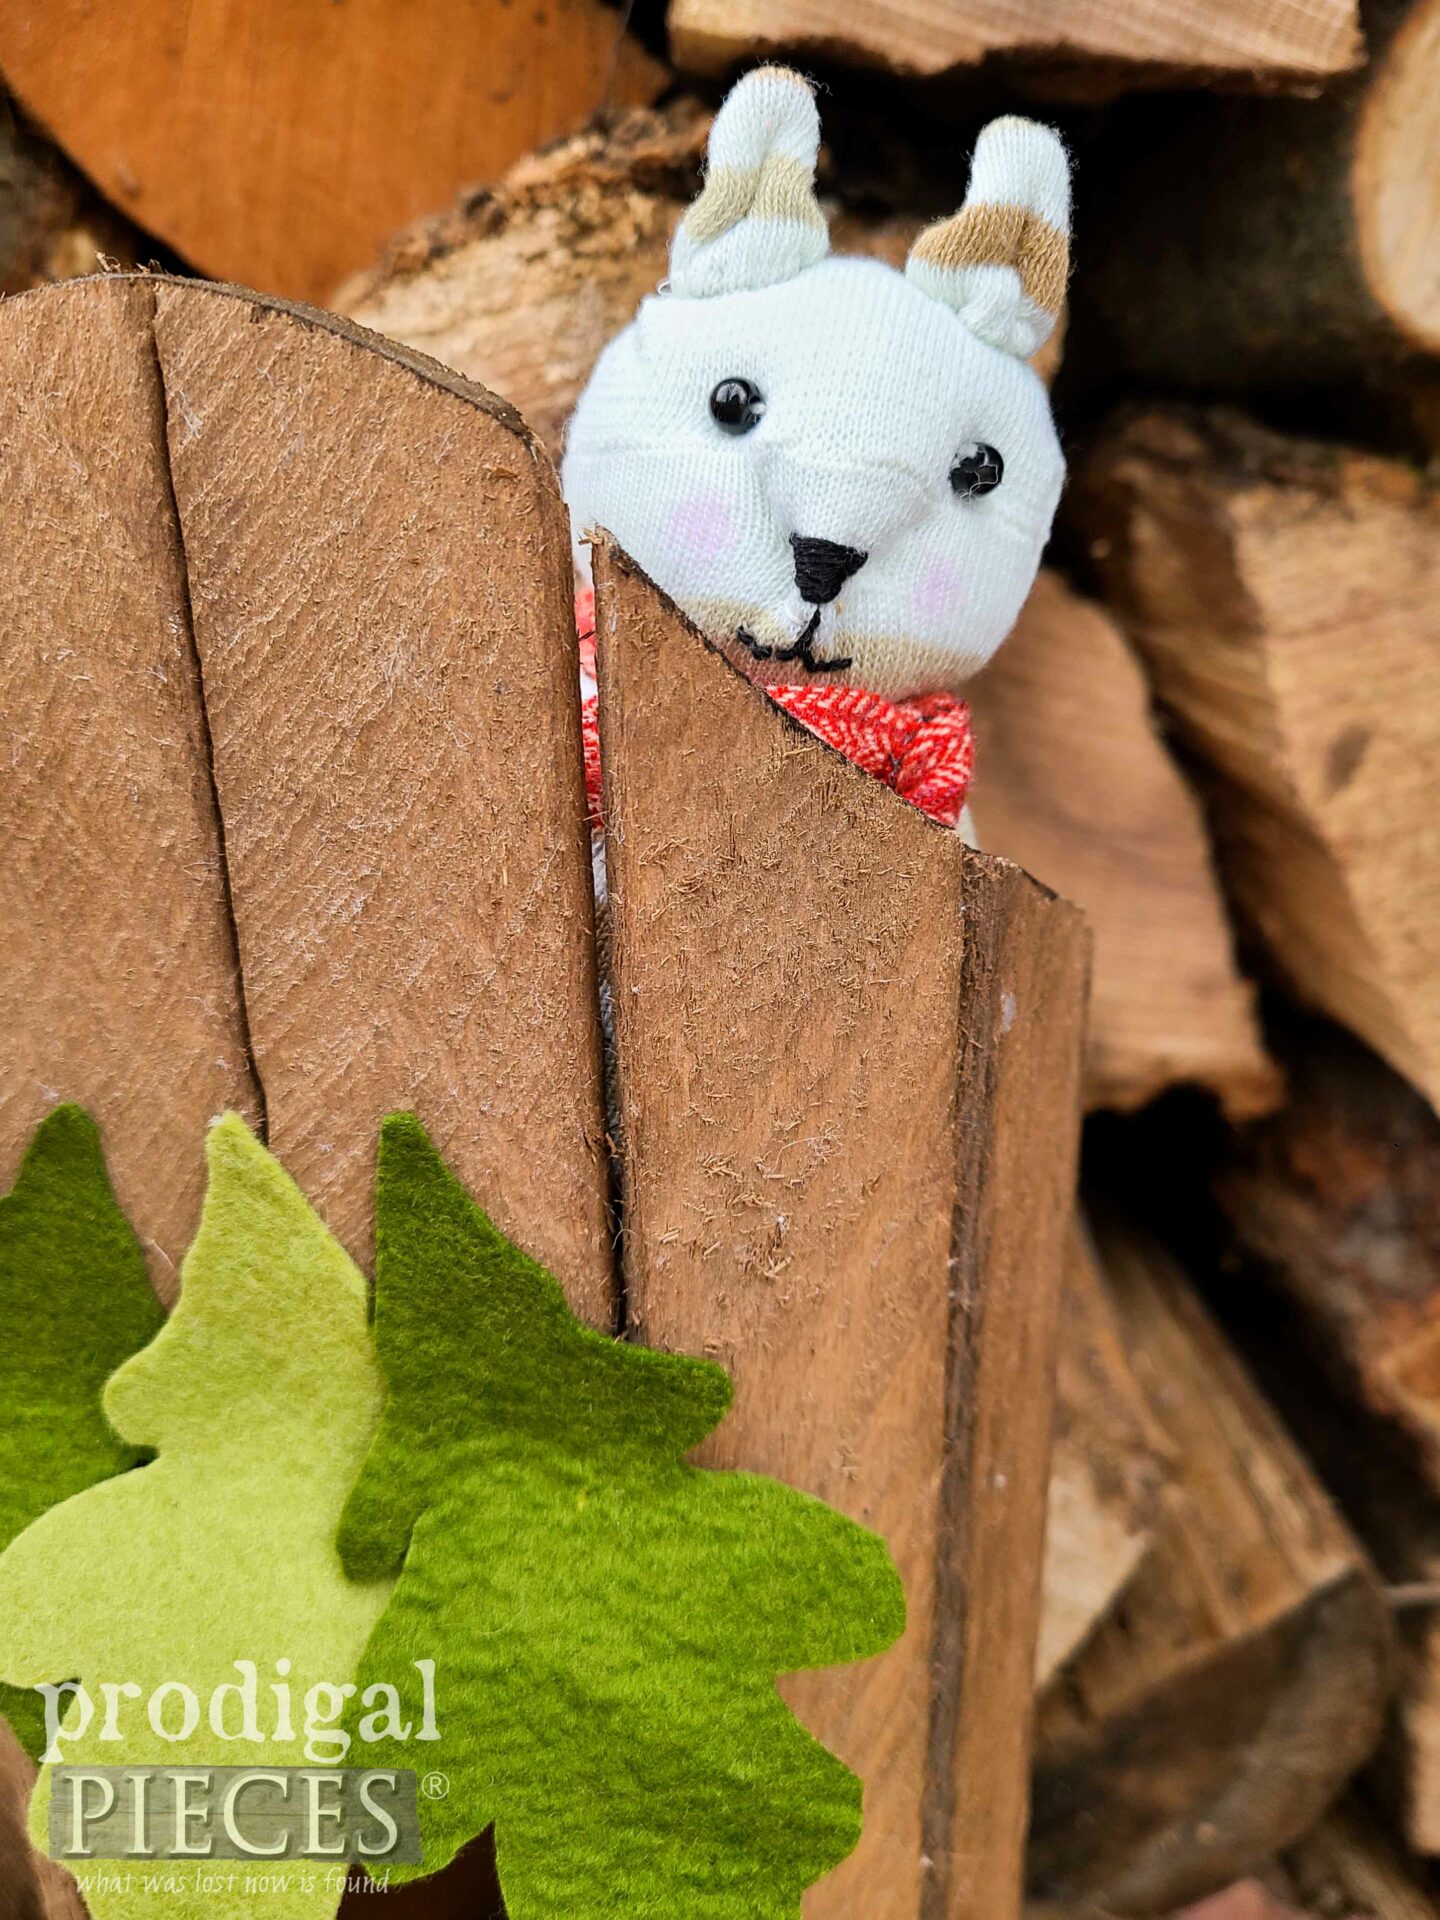 Peeking Sock Squirrel in Thrifted Planter Upcycled Treehouse by Larissa of Prodigal Pieces | prodigalpieces.com #prodigalpieces #giftidea #toys #kids